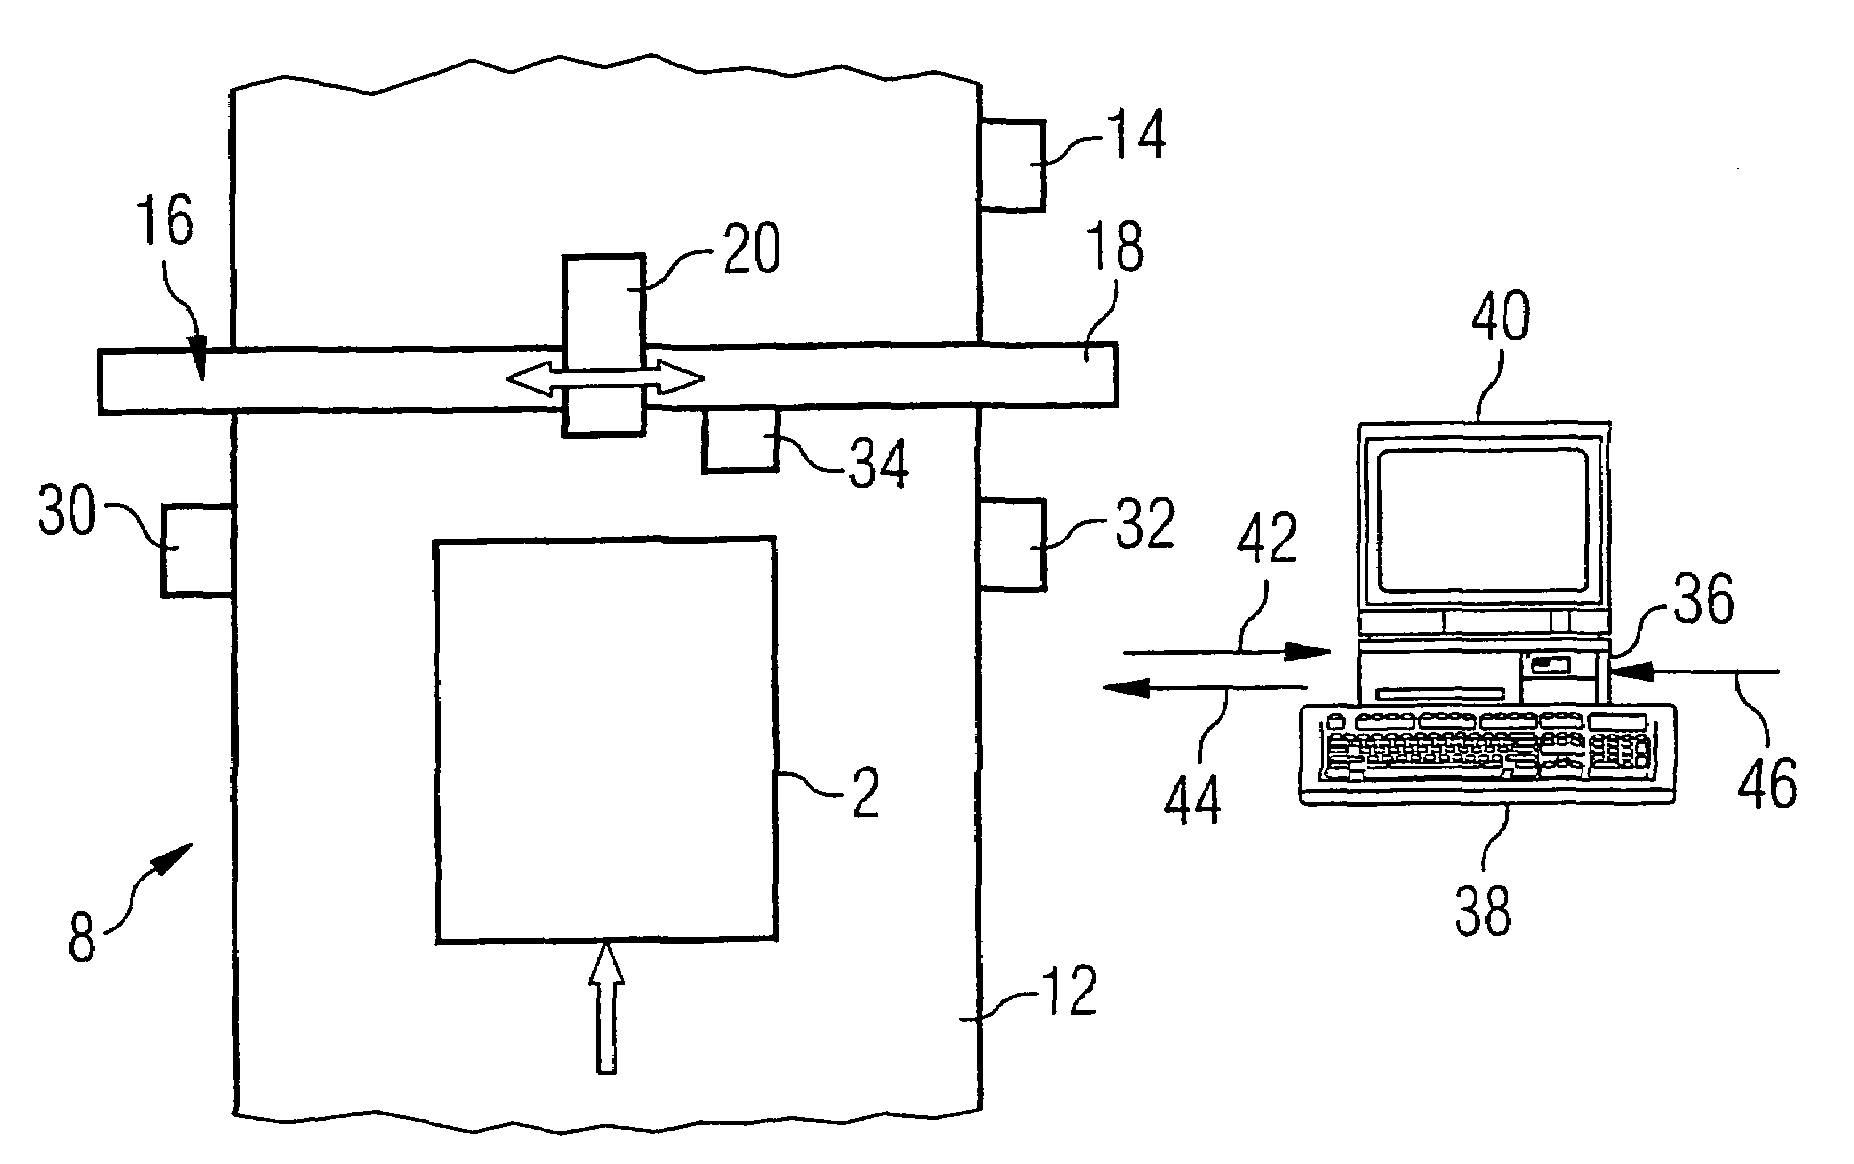 Method, apparatus and system for producing components with a pre-determined outer surface appearance, especially for front panels of kitchen units